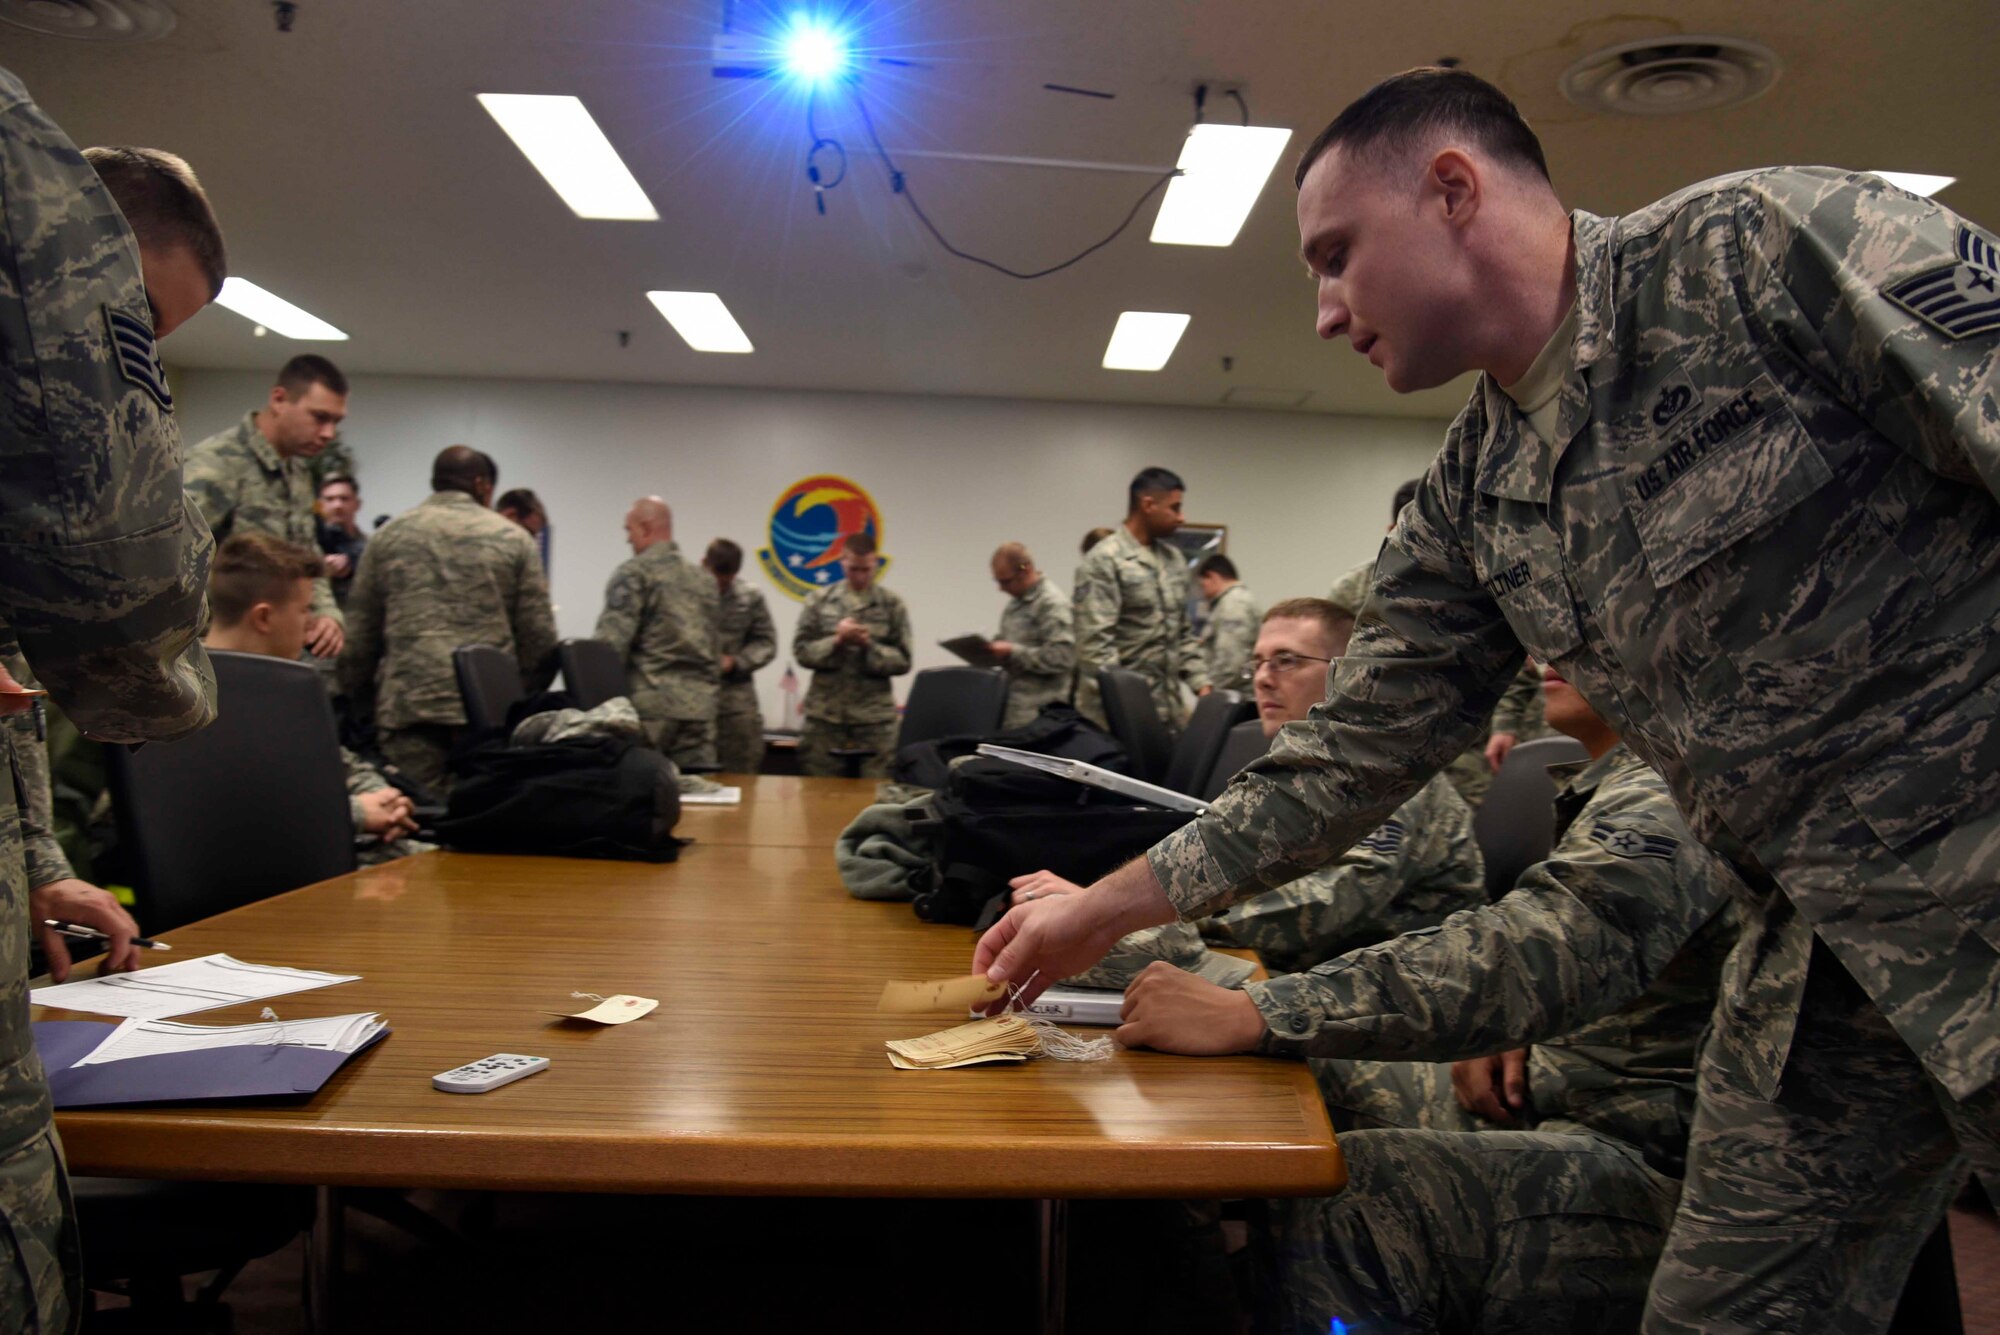 Airmen from the 35th Fighter Wing prepare forms and tags while going through the personnel deployment function line during exercise Beverly Sunrise 16-01 at Misawa Air Base, Japan, Nov. 1, 2015. During Phase 1 of the exercise, more than 300 Airmen were out-processed for a deployment to Osan Air Base, South Korea, exercising what a real-world contingency operation could look like. (U.S. Air Force photo by Airman 1st Class Jordyn Fetter/Released)